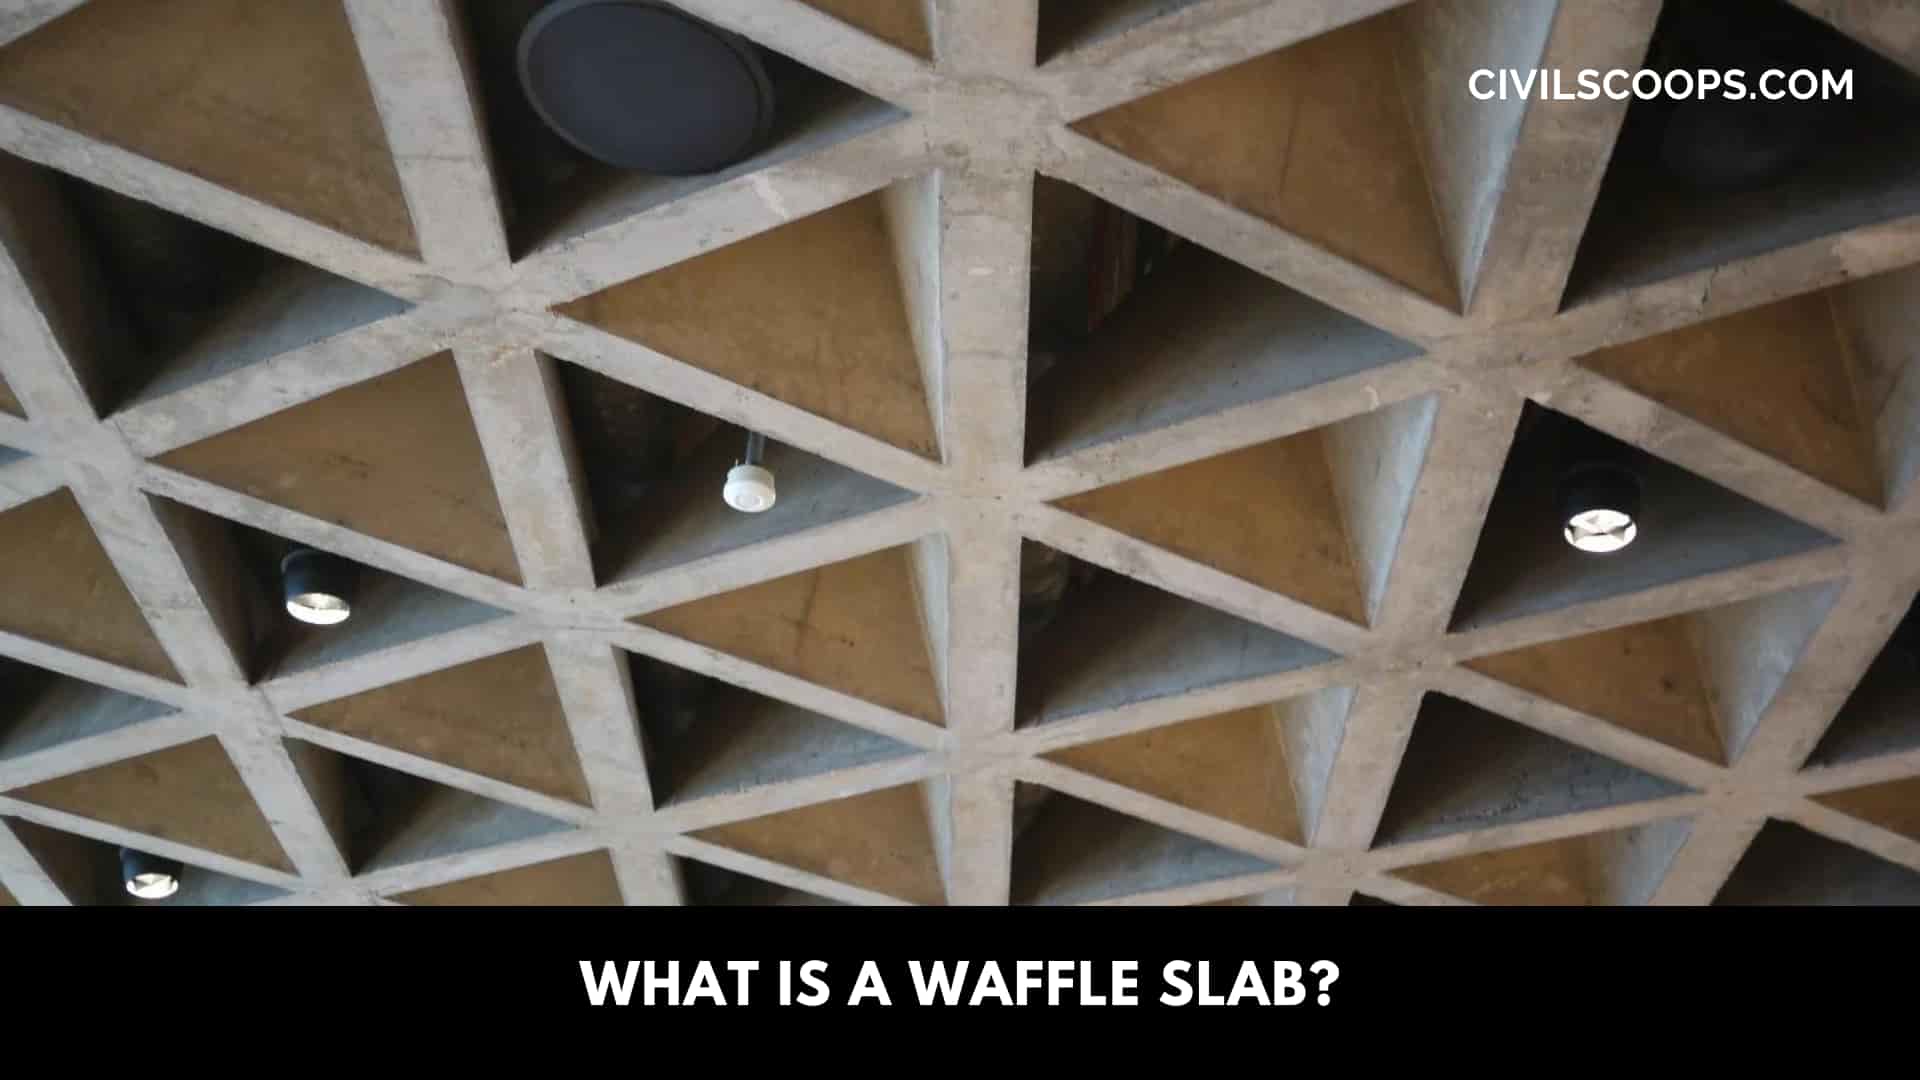 What Is a Waffle Slab?